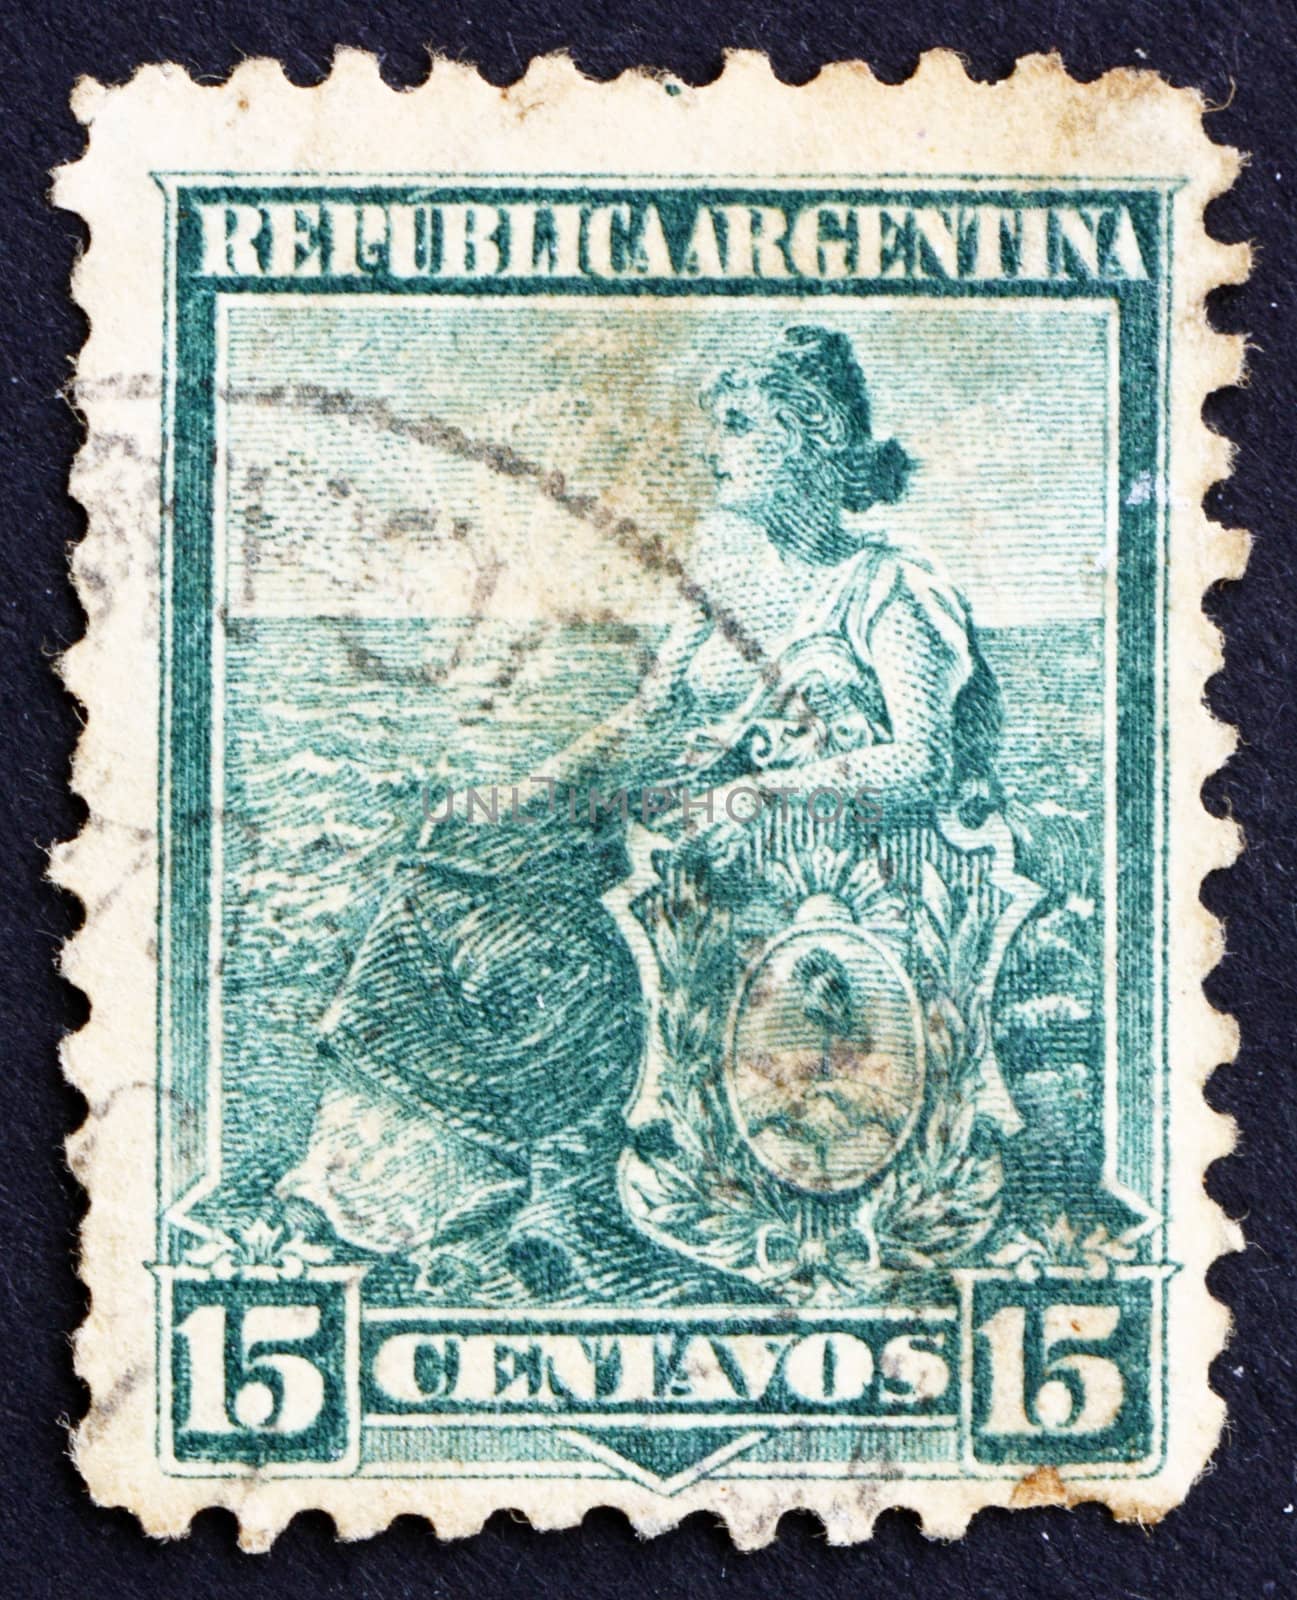 ARGENTINA - CIRCA 1901: a stamp printed in the Argentina shows Liberty Seated, Allegory, circa 1901